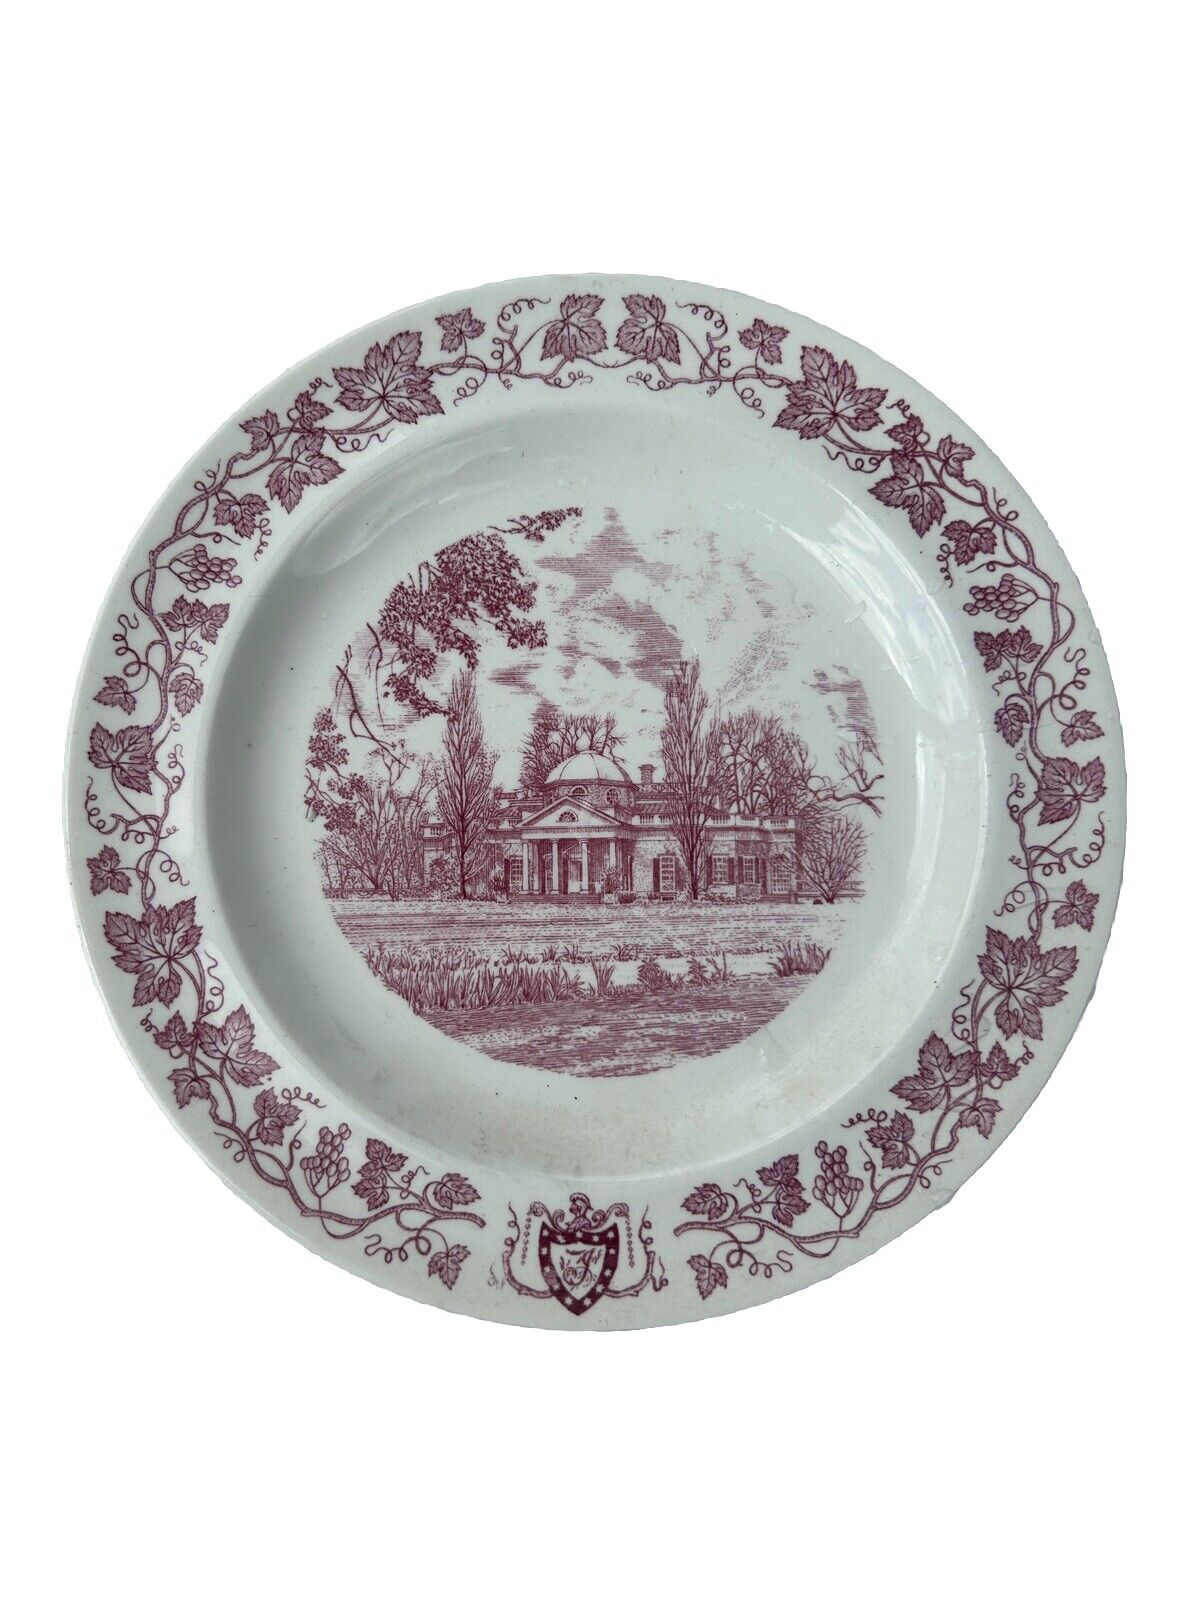 Vintage Wedgwood Monticello Home Of Thomas Jefferson Collectable Plate